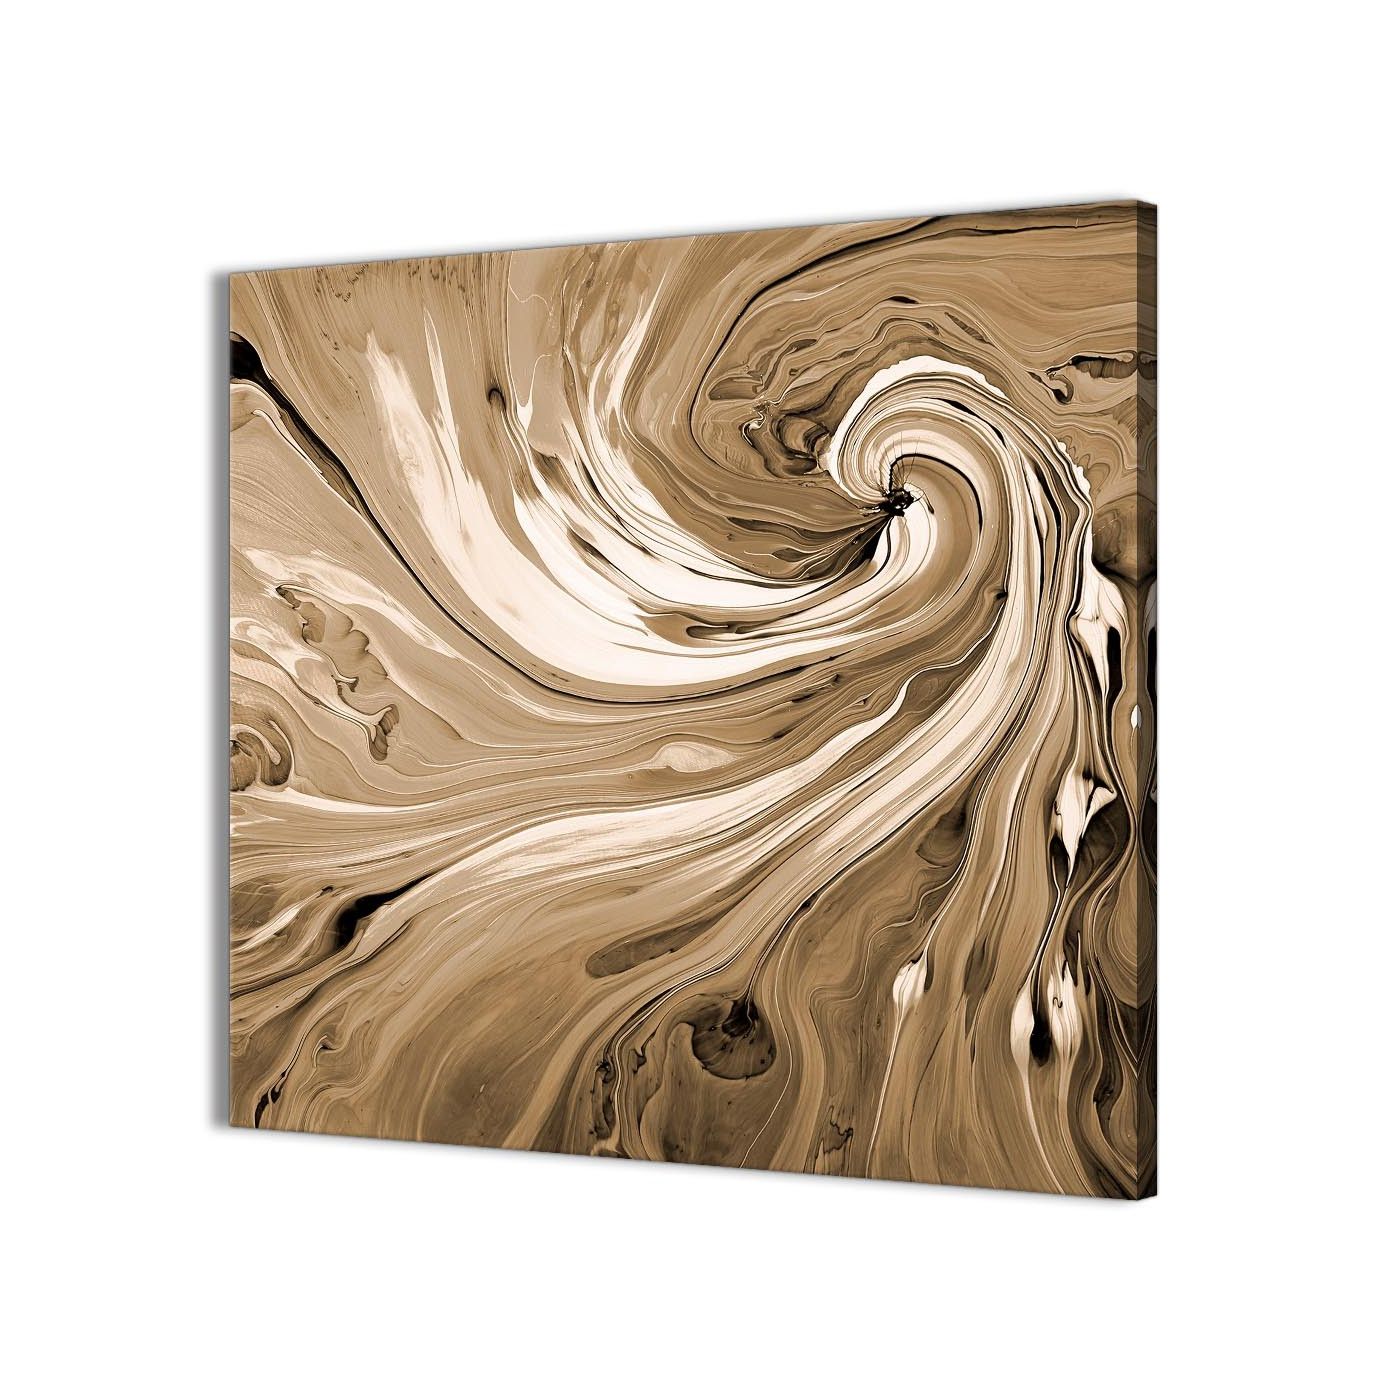 Widely Used Brown Cream Swirls Modern Abstract Canvas Wall Art – 64cm Square – 1s349m Intended For Square Canvas Wall Art (View 9 of 15)